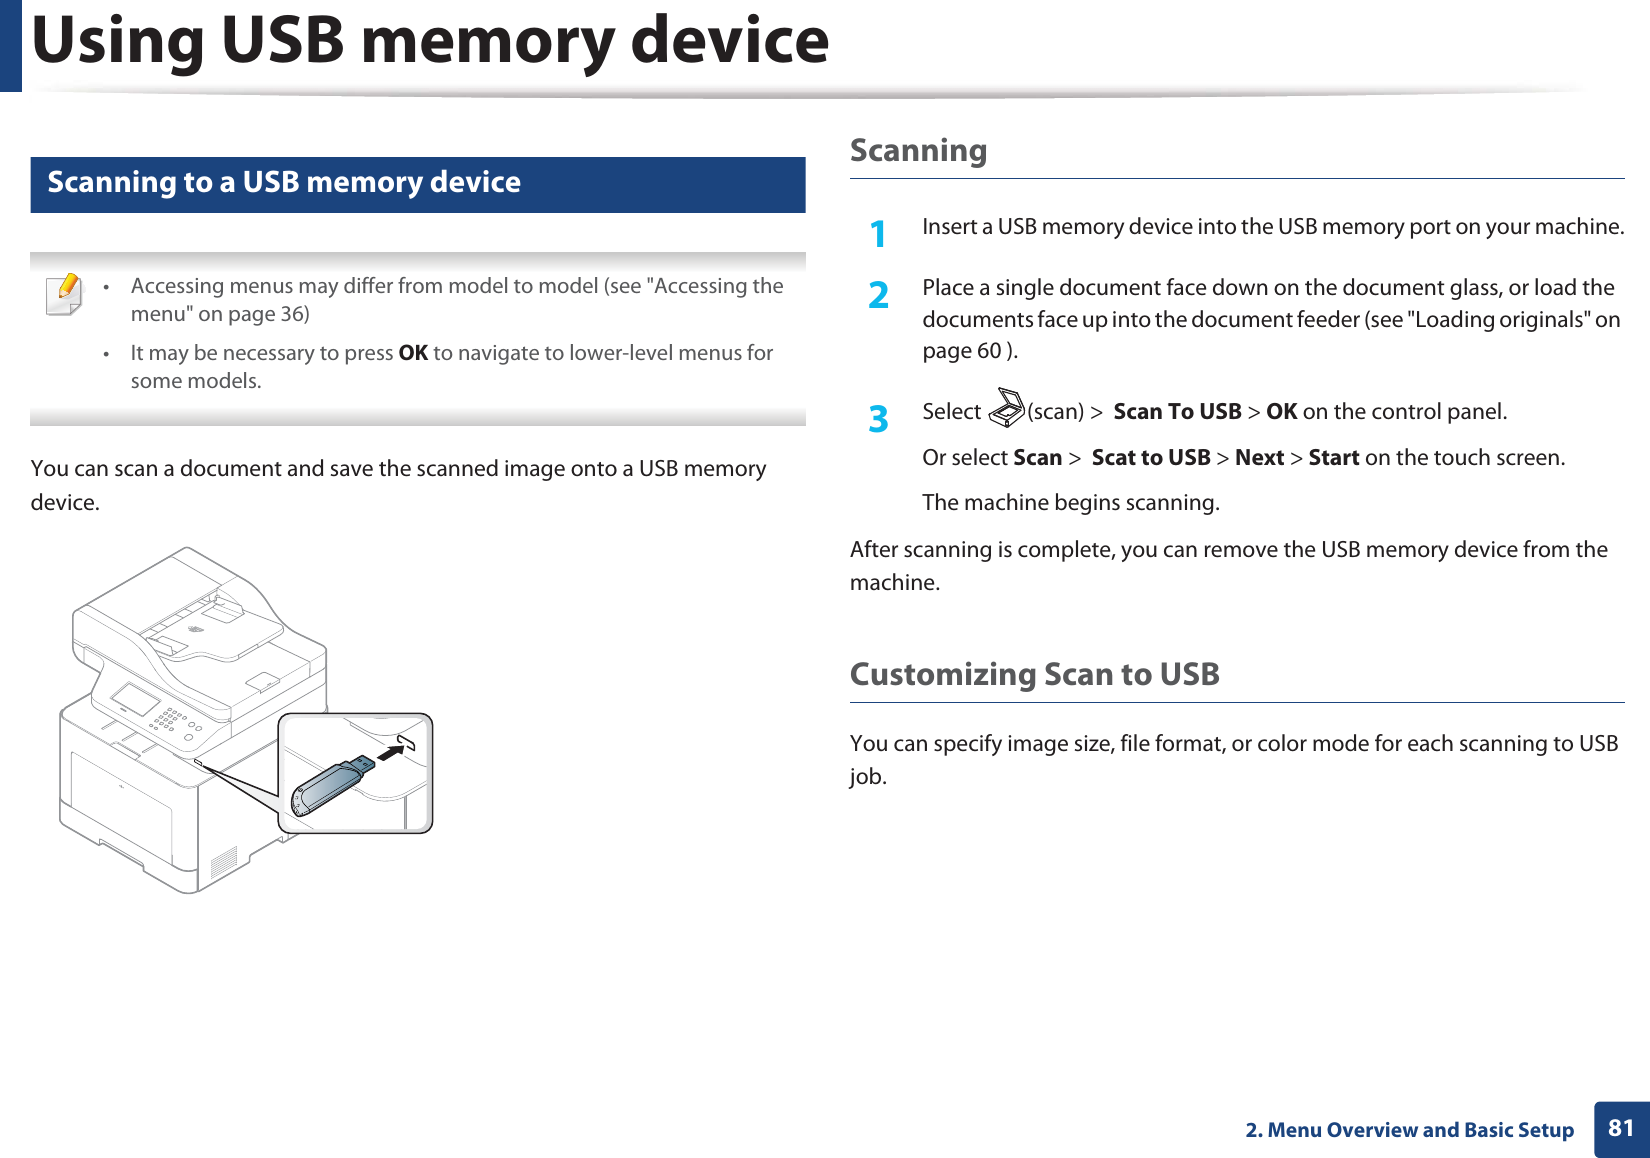 Using USB memory device812. Menu Overview and Basic Setup26 Scanning to a USB memory device • Accessing menus may differ from model to model (see &quot;Accessing the menu&quot; on page 36)• It may be necessary to press OK to navigate to lower-level menus for some models. You can scan a document and save the scanned image onto a USB memory device.Scanning1Insert a USB memory device into the USB memory port on your machine.2  Place a single document face down on the document glass, or load the documents face up into the document feeder (see &quot;Loading originals&quot; on page 60 ).3  Select (scan) &gt;  Scan To USB &gt; OK on the control panel.Or select Scan &gt;  Scat to USB &gt; Next &gt; Start on the touch screen.The machine begins scanning.After scanning is complete, you can remove the USB memory device from the machine.Customizing Scan to USB You can specify image size, file format, or color mode for each scanning to USB job.